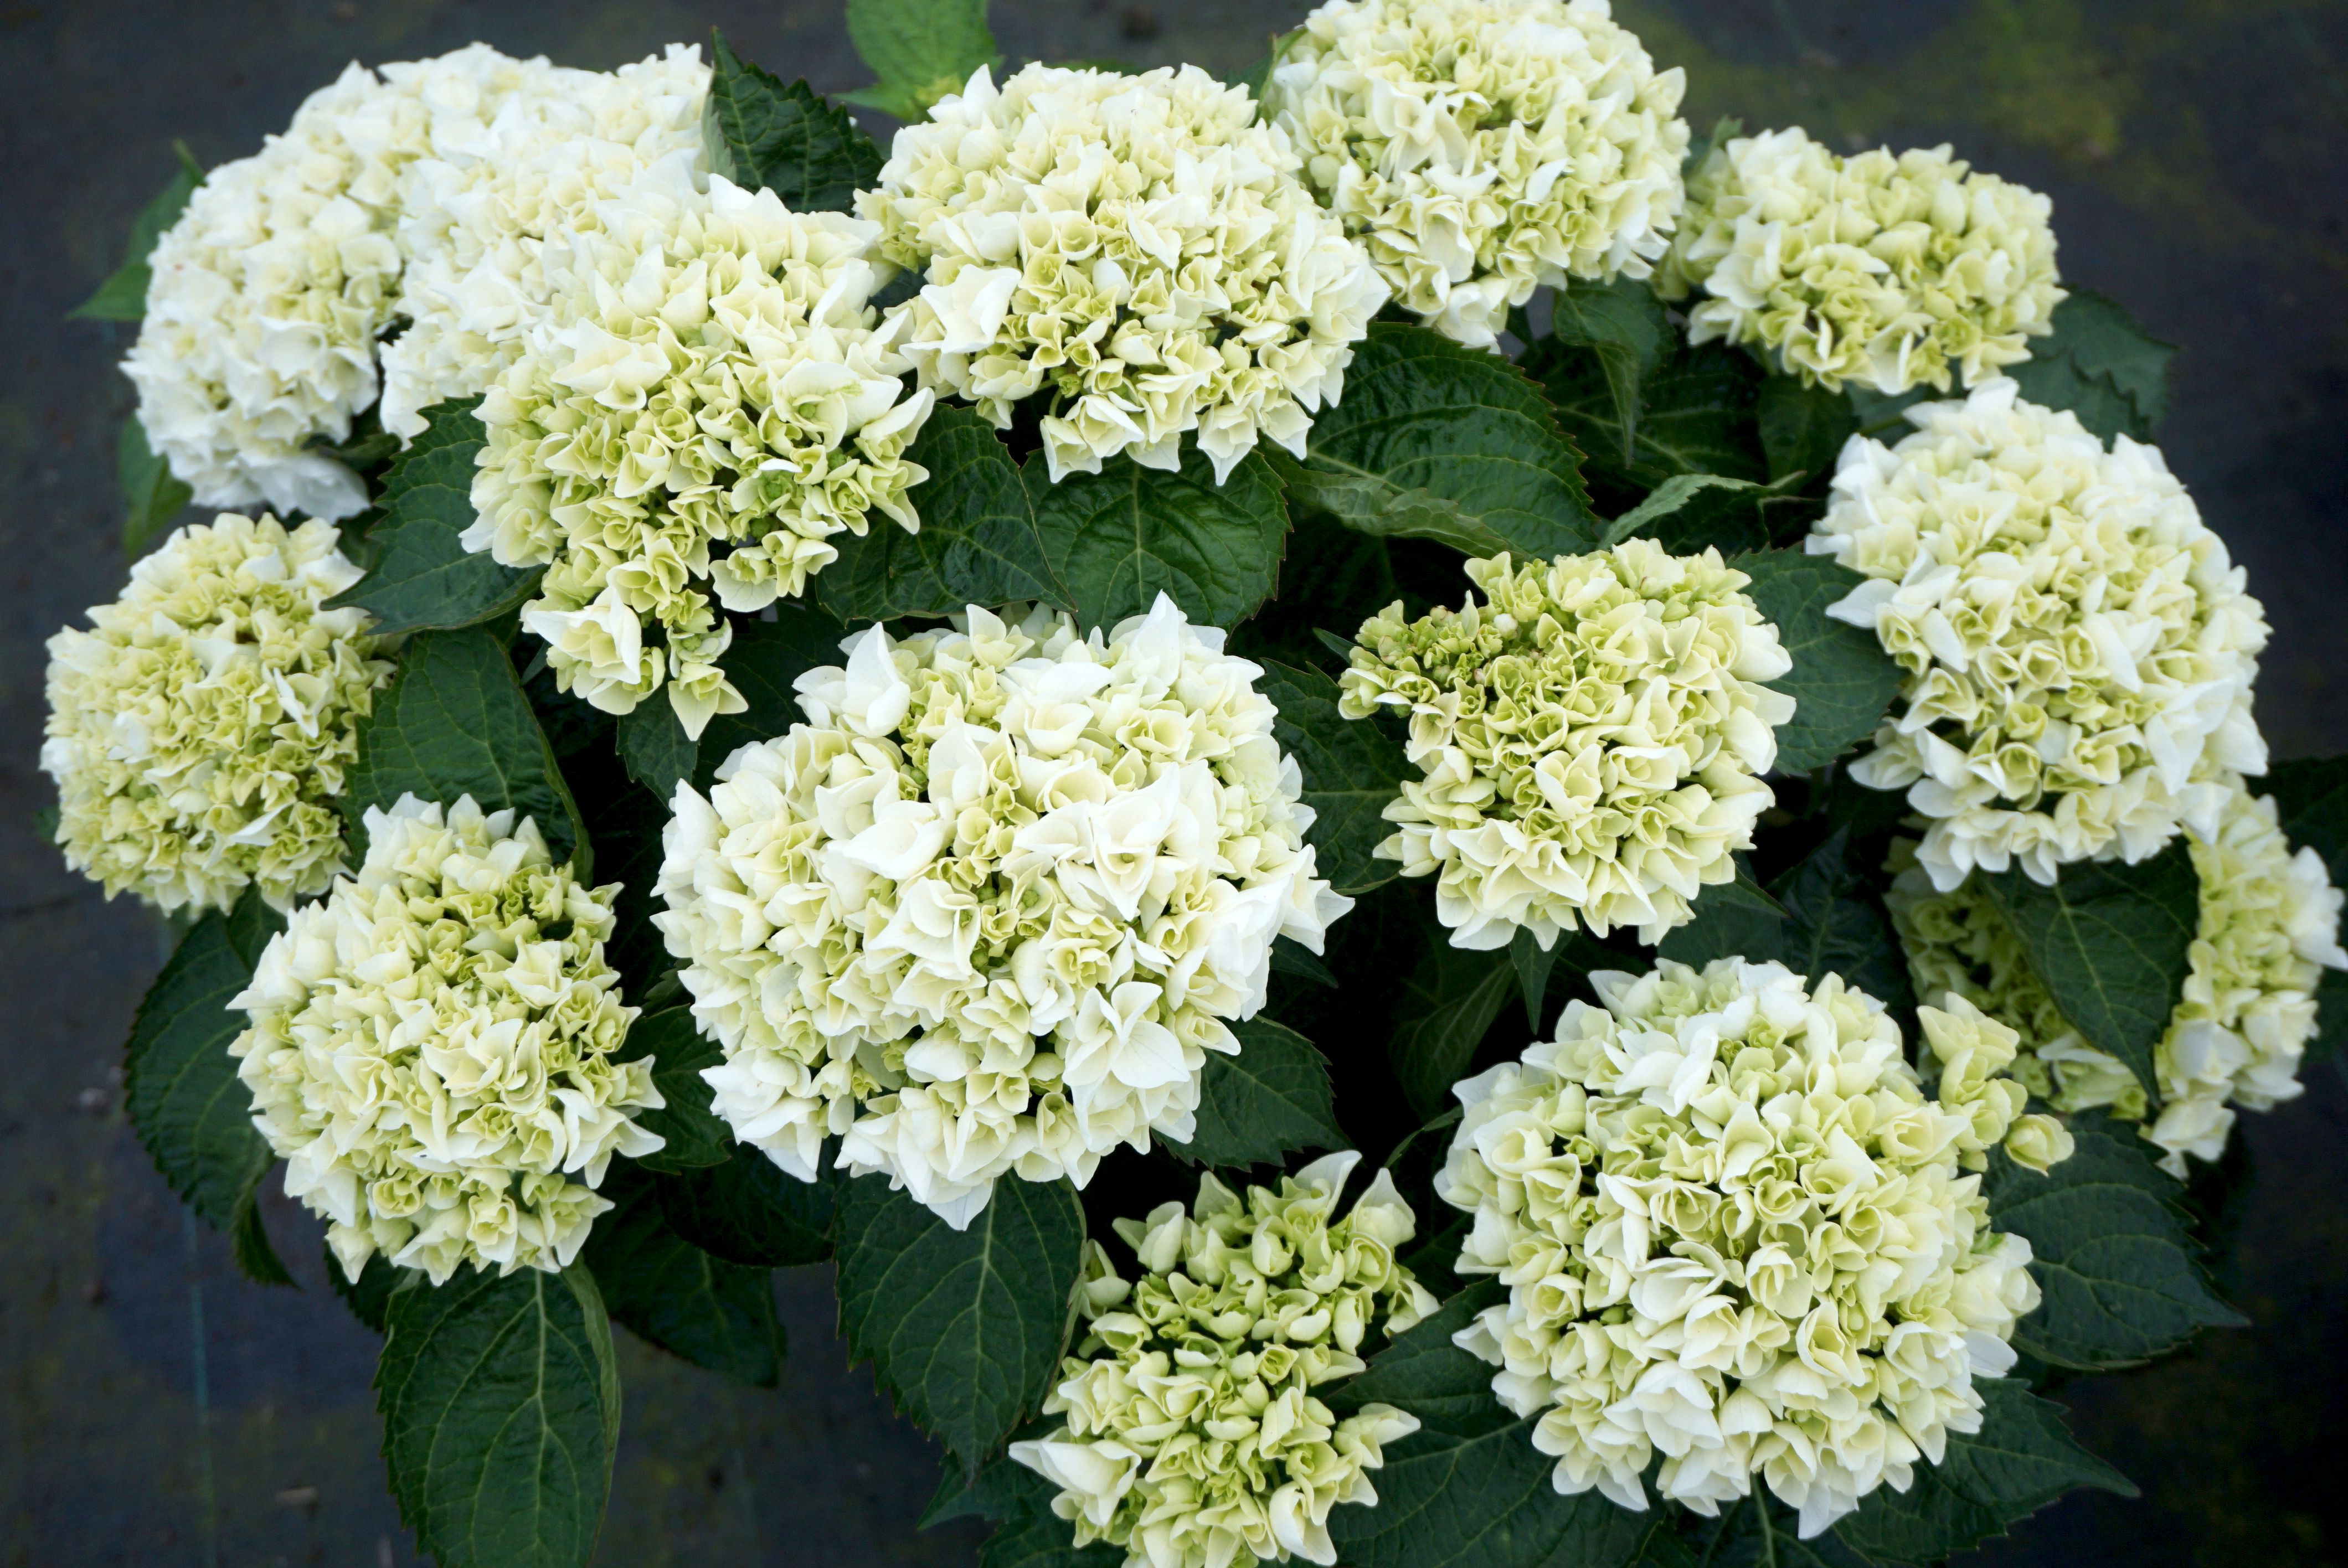 images/plants/hydrangea/hyd-magical-everlasting-bride/hyd-magical-everlasting-bride-0007.jpg